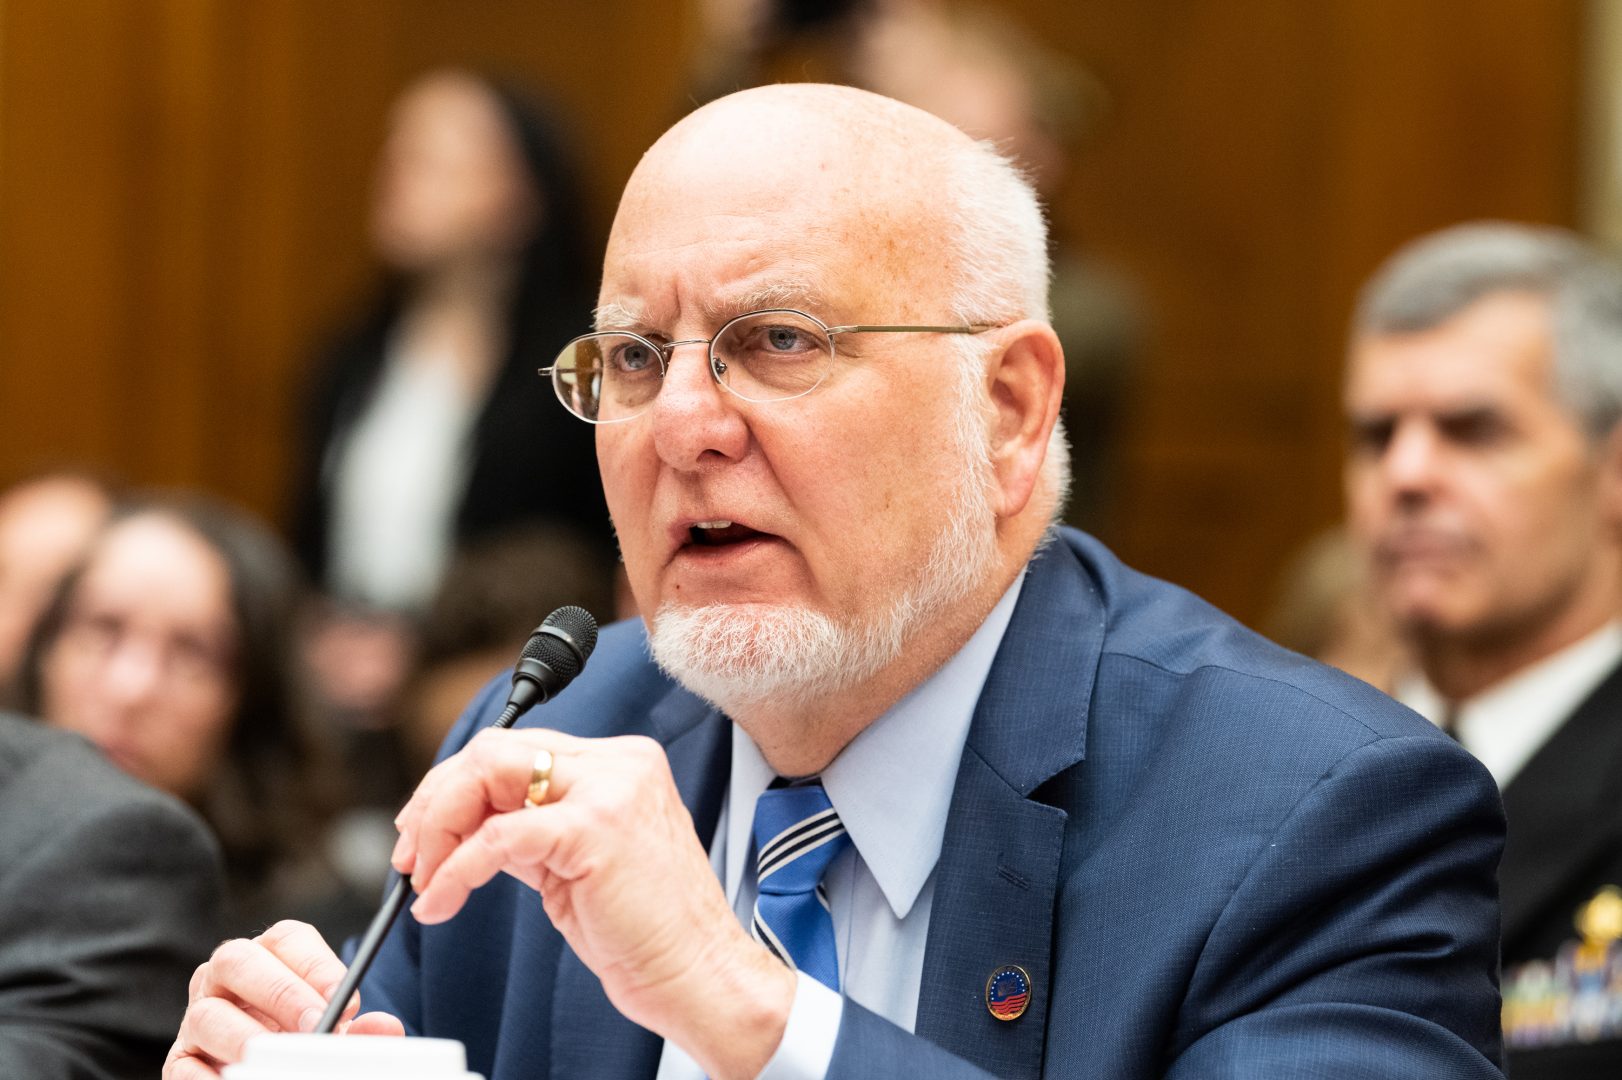 Dr. Robert Redfield, Director of the Centers for Disease Control and Prevention, speaks at a House Committee on Oversight and Reform hearing on Coronavirus Preparedness and Response, Washington D.C., March 11th, 2020.